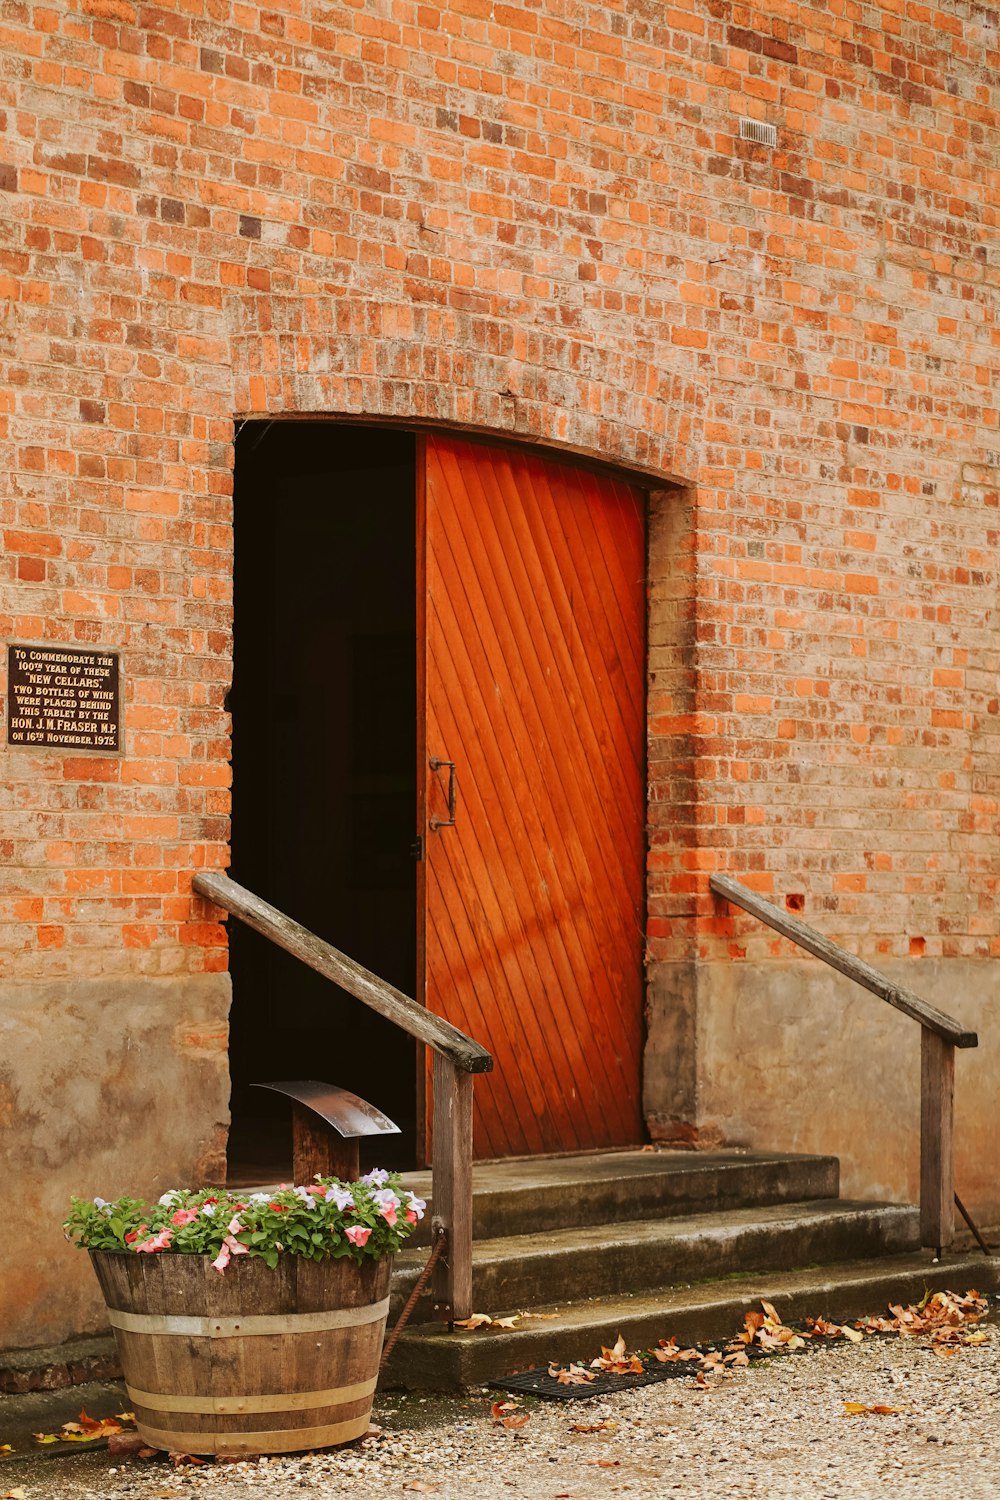 a brick building with a red door and a planter with flowers